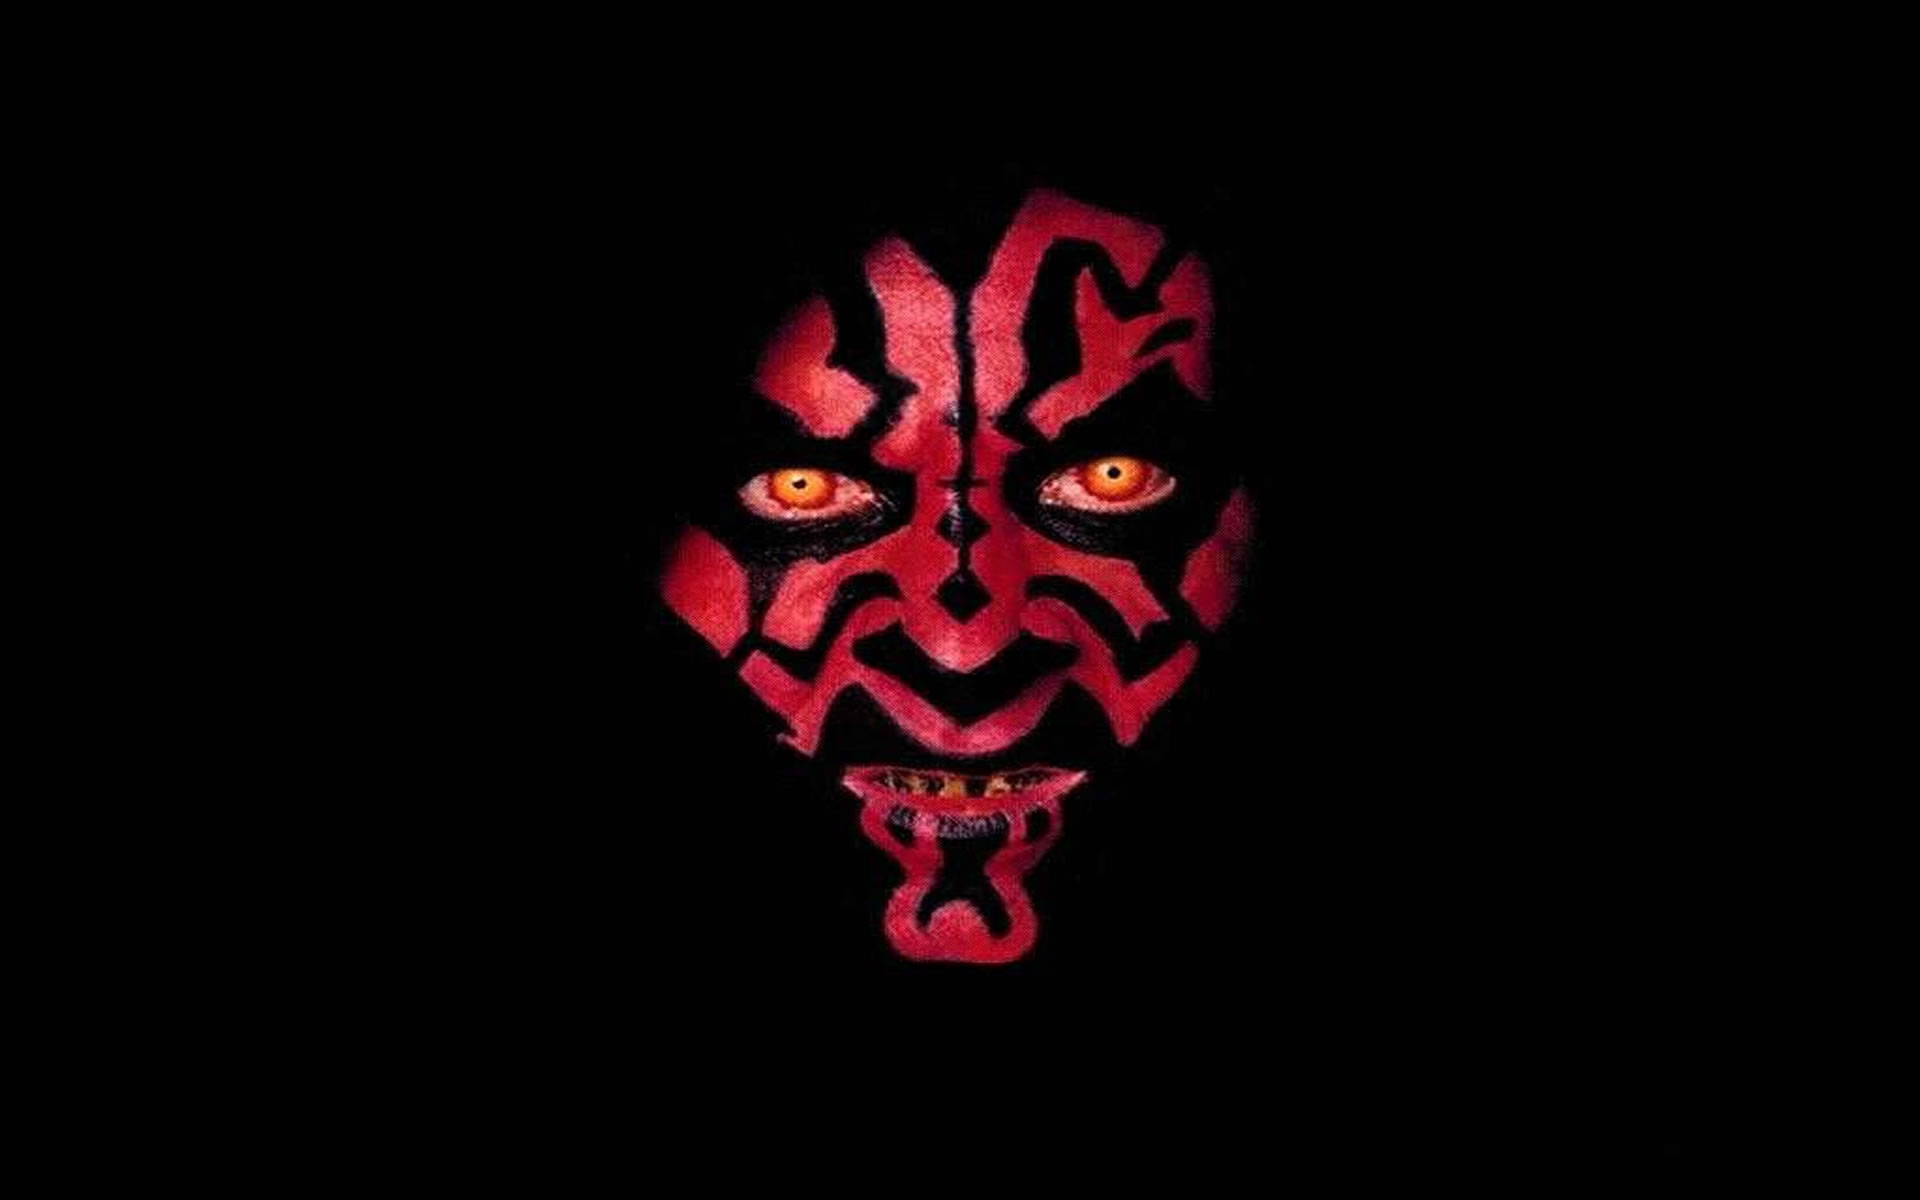 Star Wars Wallpaper Lord Sith   Wallpapers